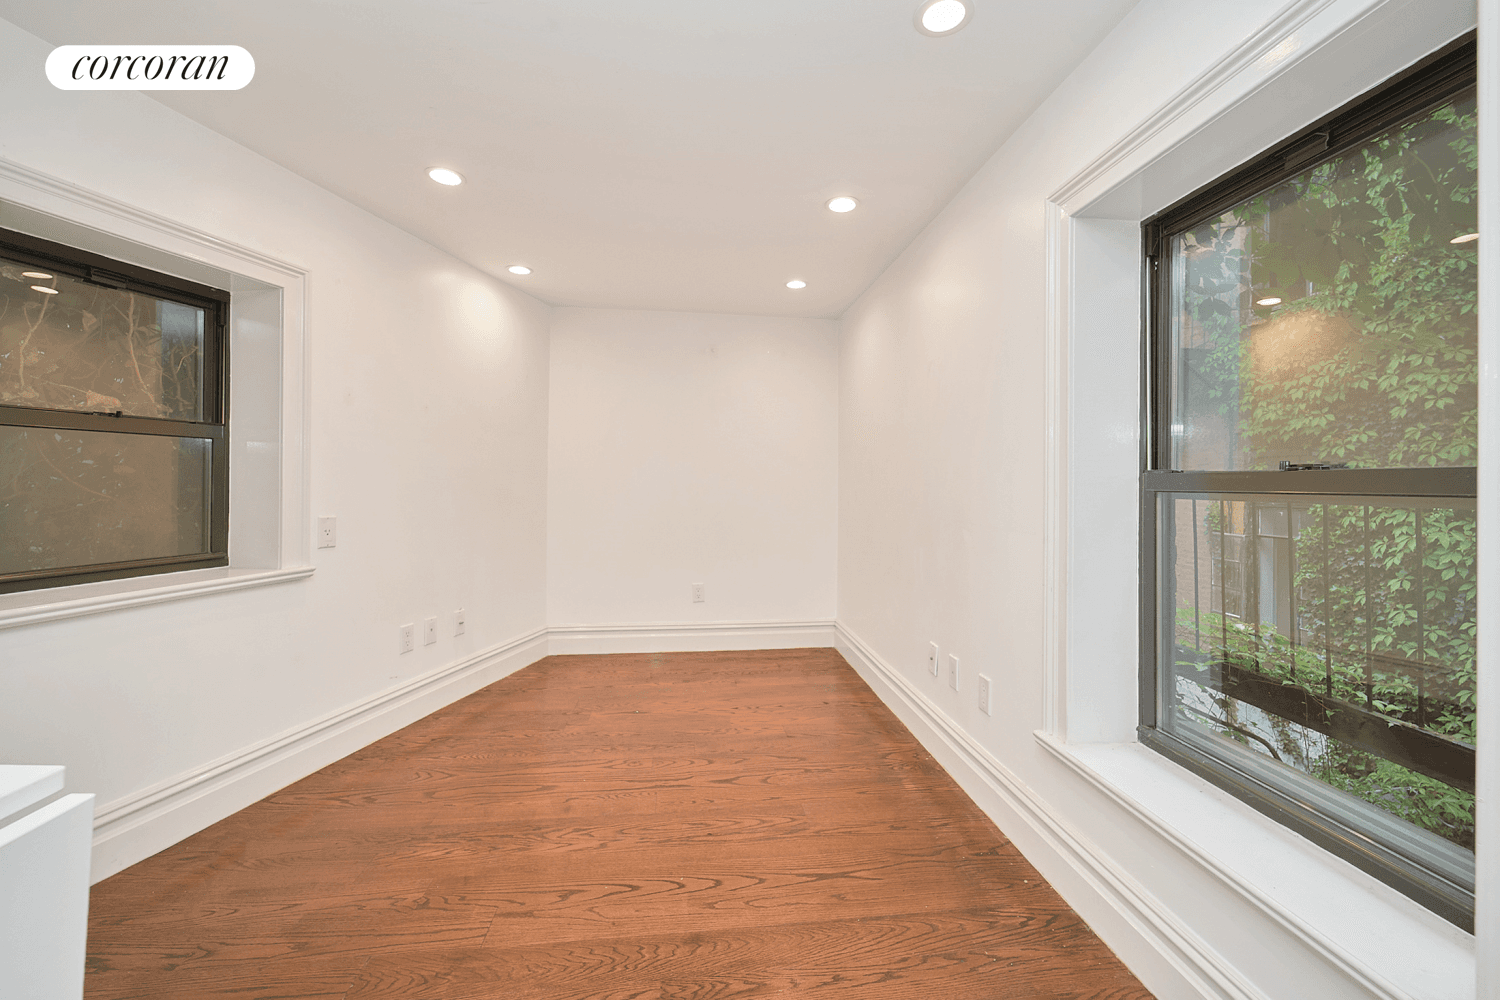 Renovated studio w private outdoor space in prime West Village locationApartment Features Outdoor space full of natural light Hardwood floor Marble bathroom w stall shower Built in closet Separate Kitchen ...